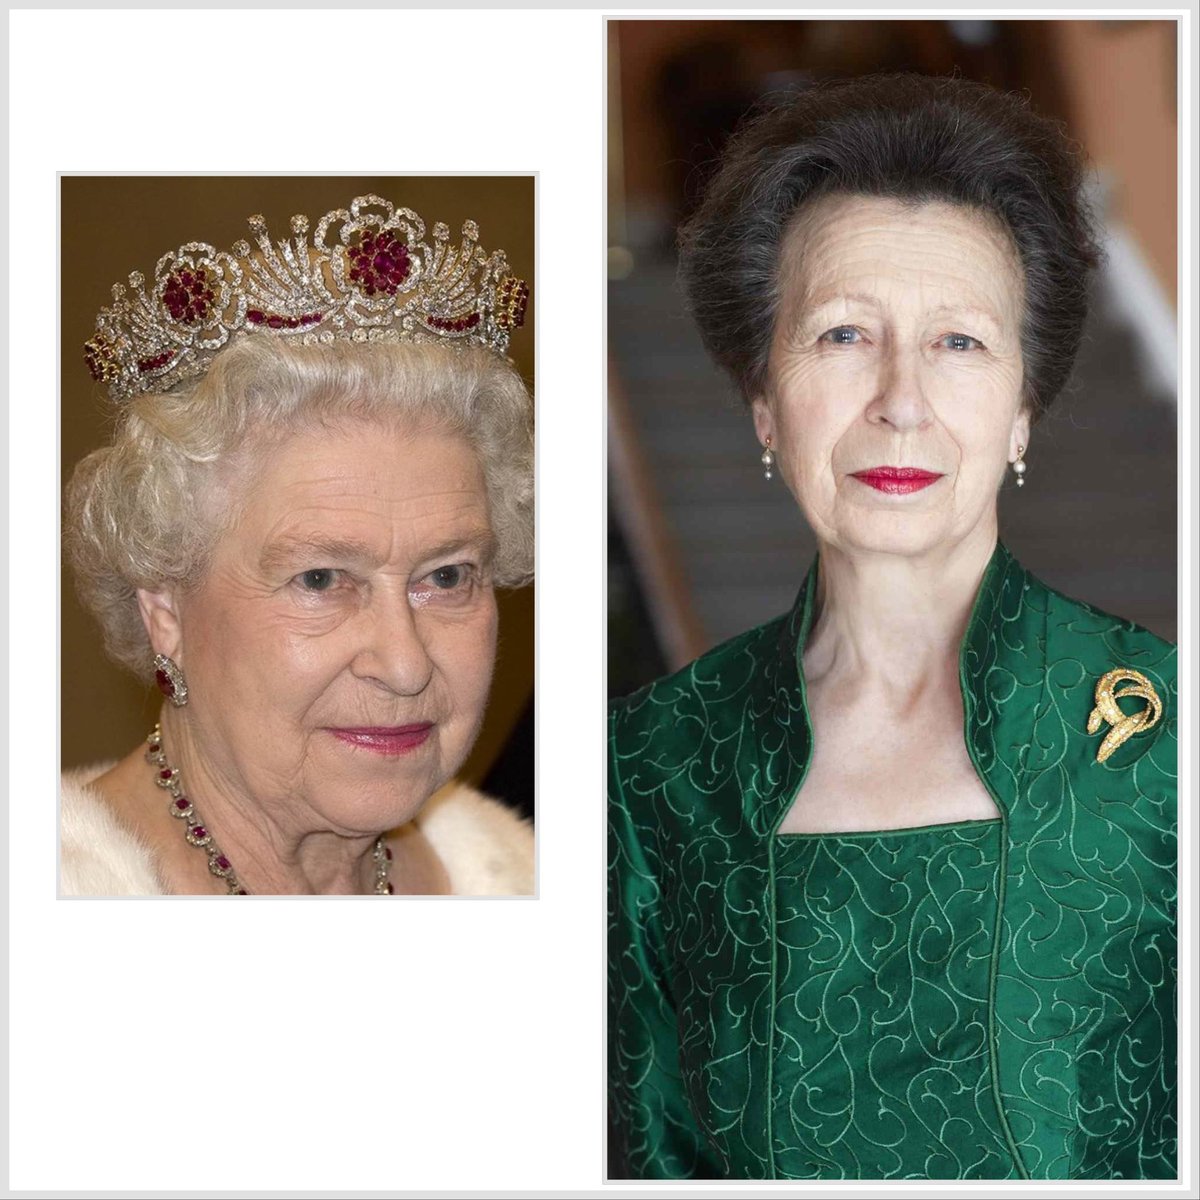 Very excited about the coronation.  I wonder what tiaras the HRH lady bosses will be wearing.  I these would look lovely for the coronation.👑👑👑 #PrincessCatherine #duchessofedinburgh #princessanne #Coronation2023 #royaljewels